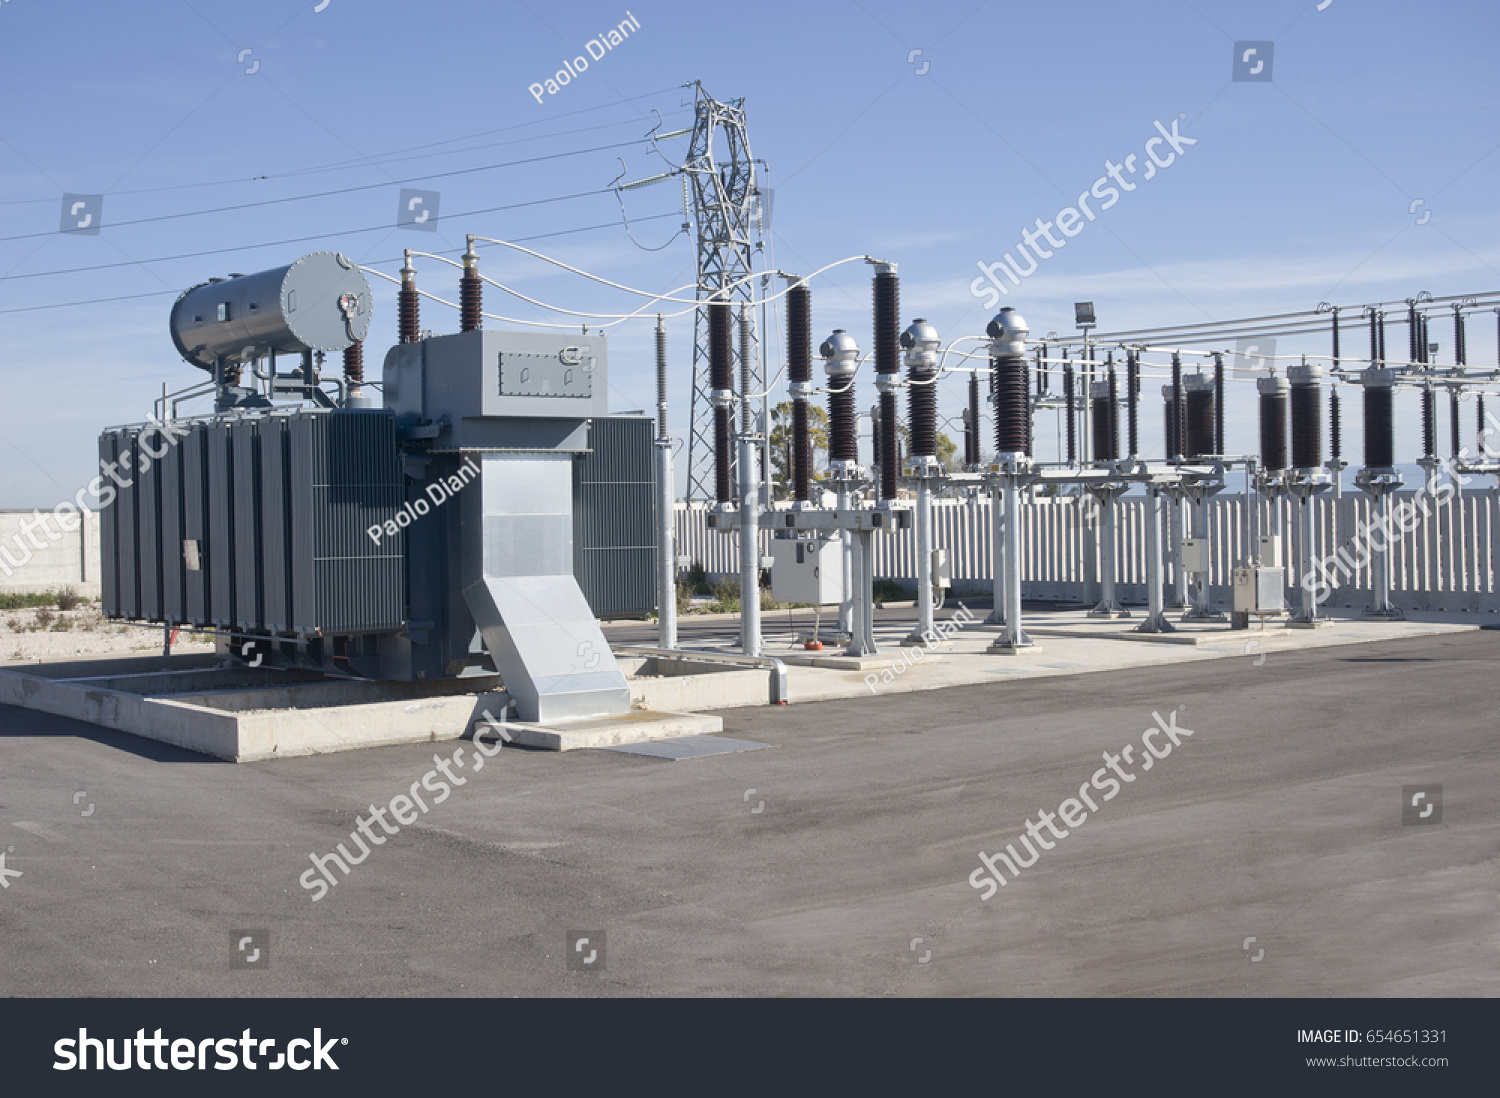 Electric Power Substation:
Electricity Substation, Power Line, Power Station, Equipment, Cable #654651331